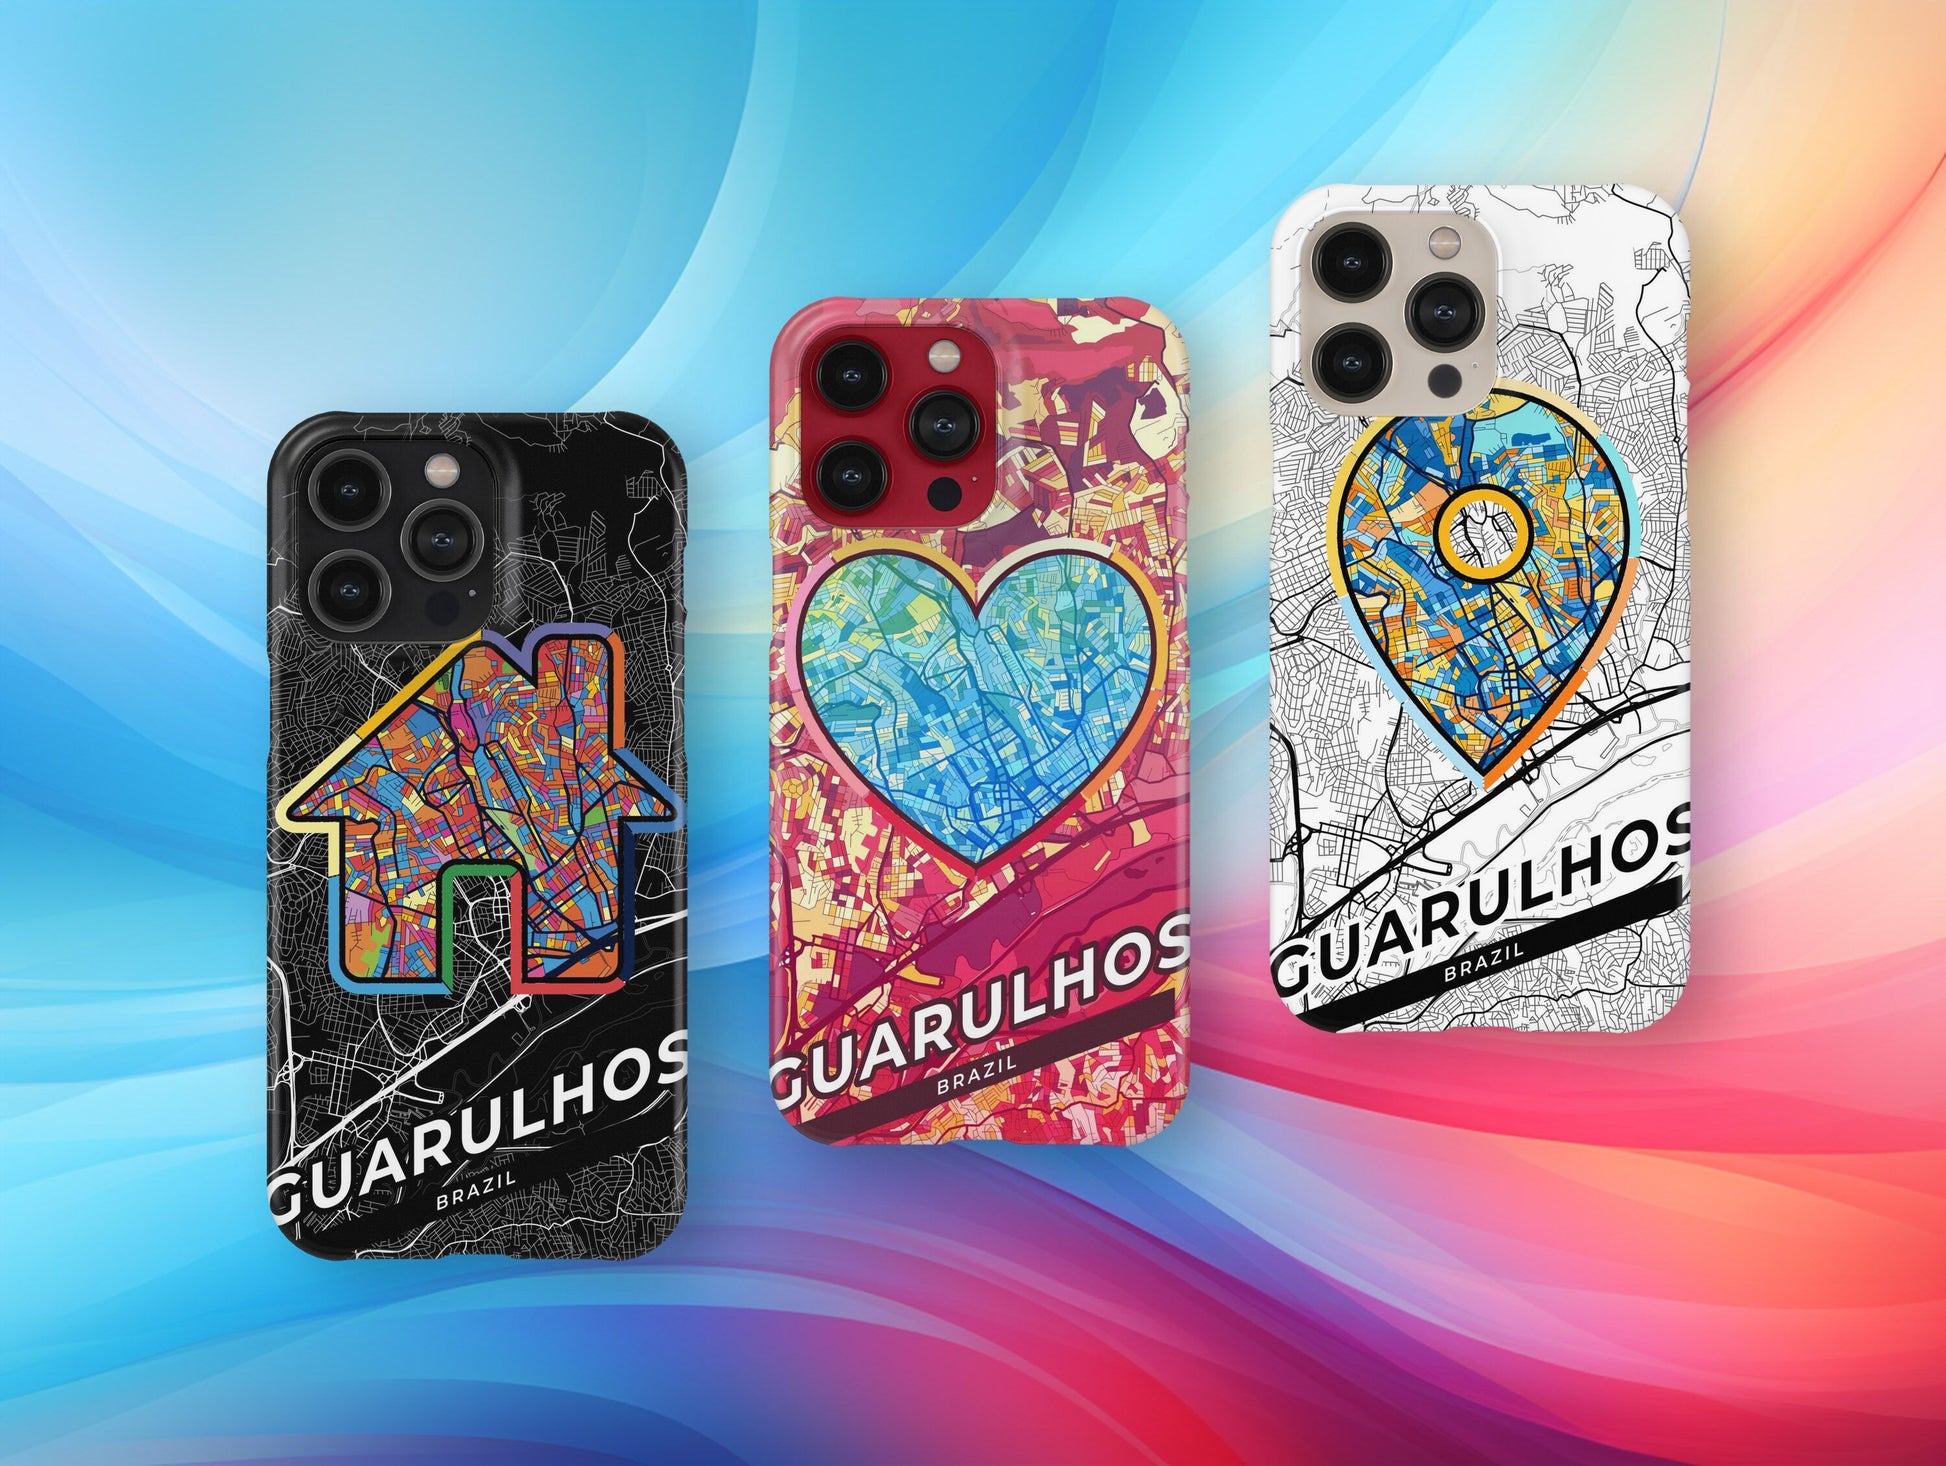 Guarulhos Brazil slim phone case with colorful icon. Birthday, wedding or housewarming gift. Couple match cases.